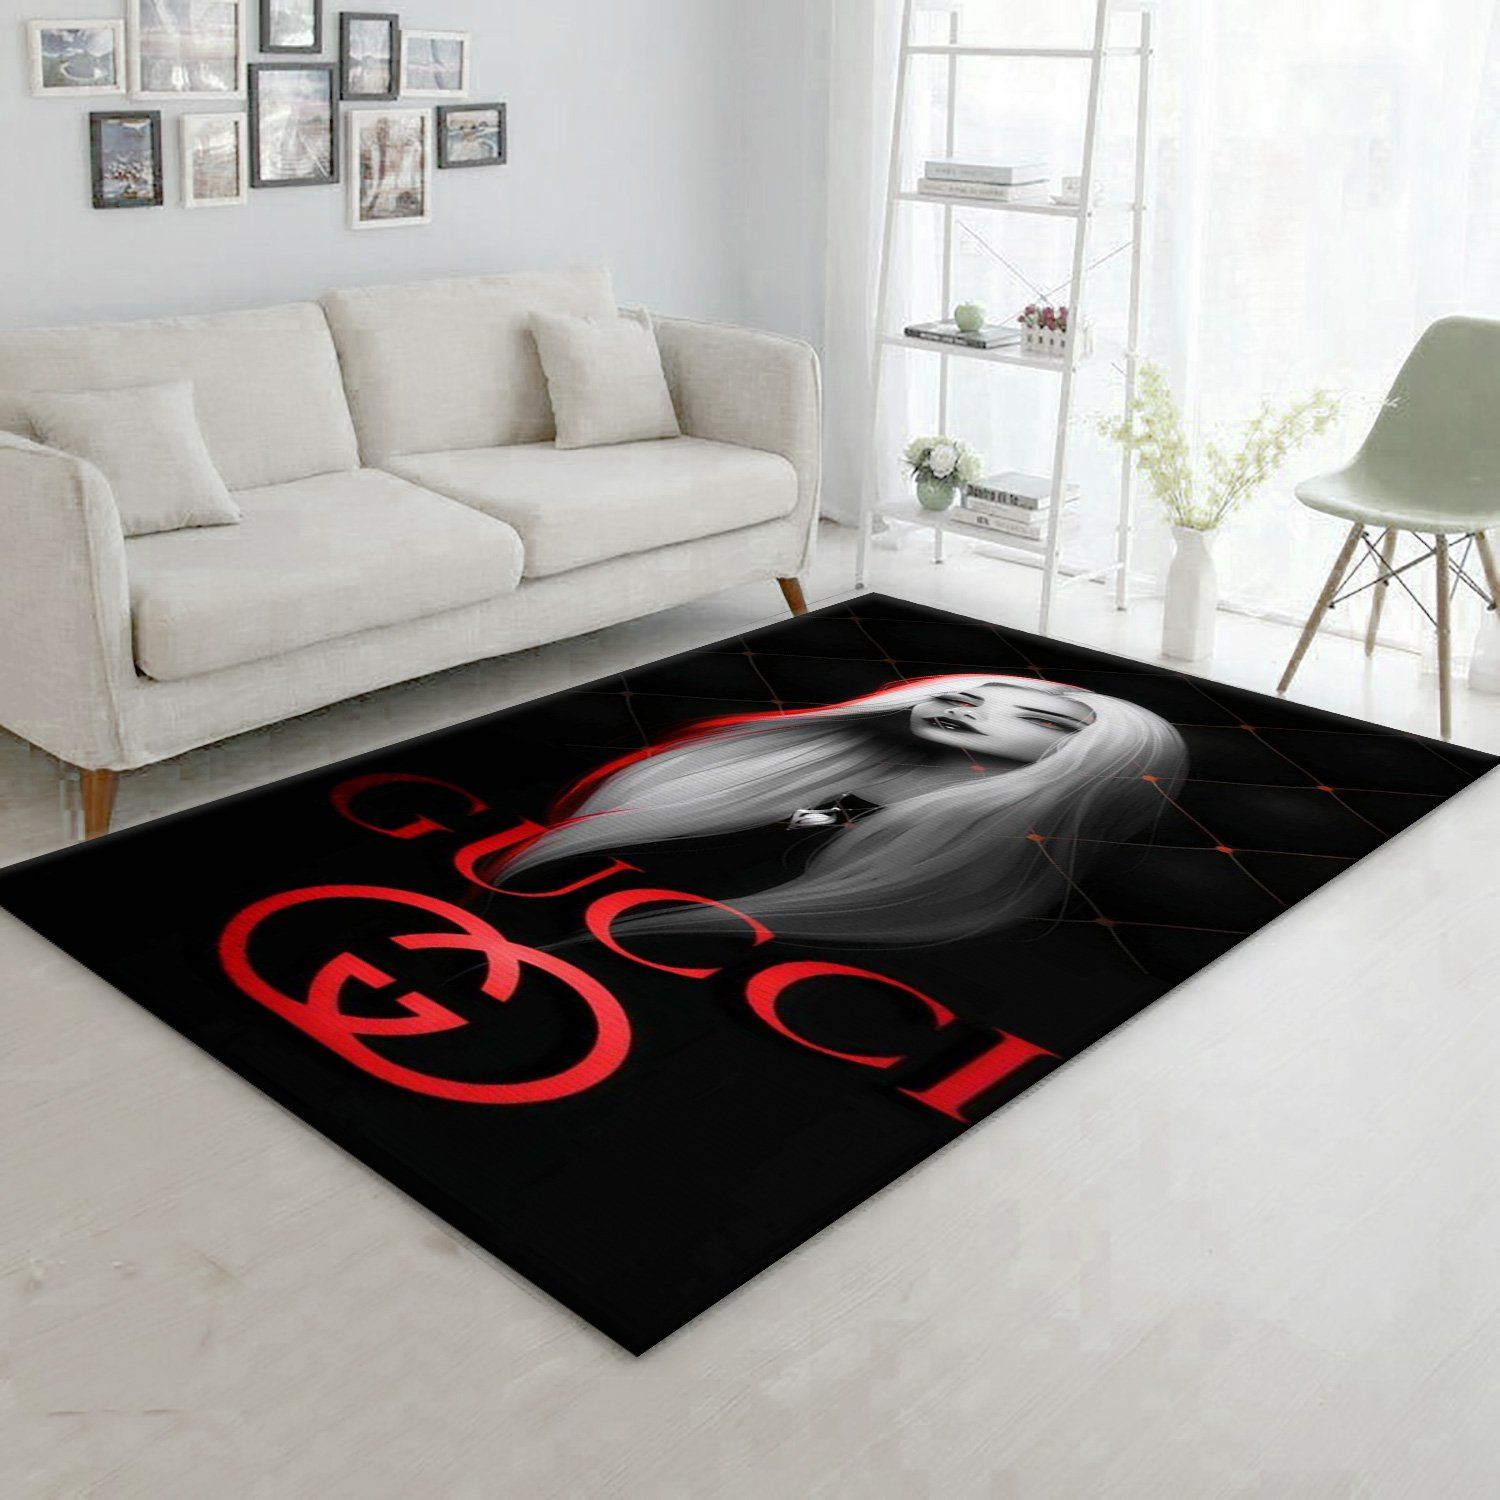 Gucci Fashion Brand Rug Bedroom Rug US Gift Decor Travels in